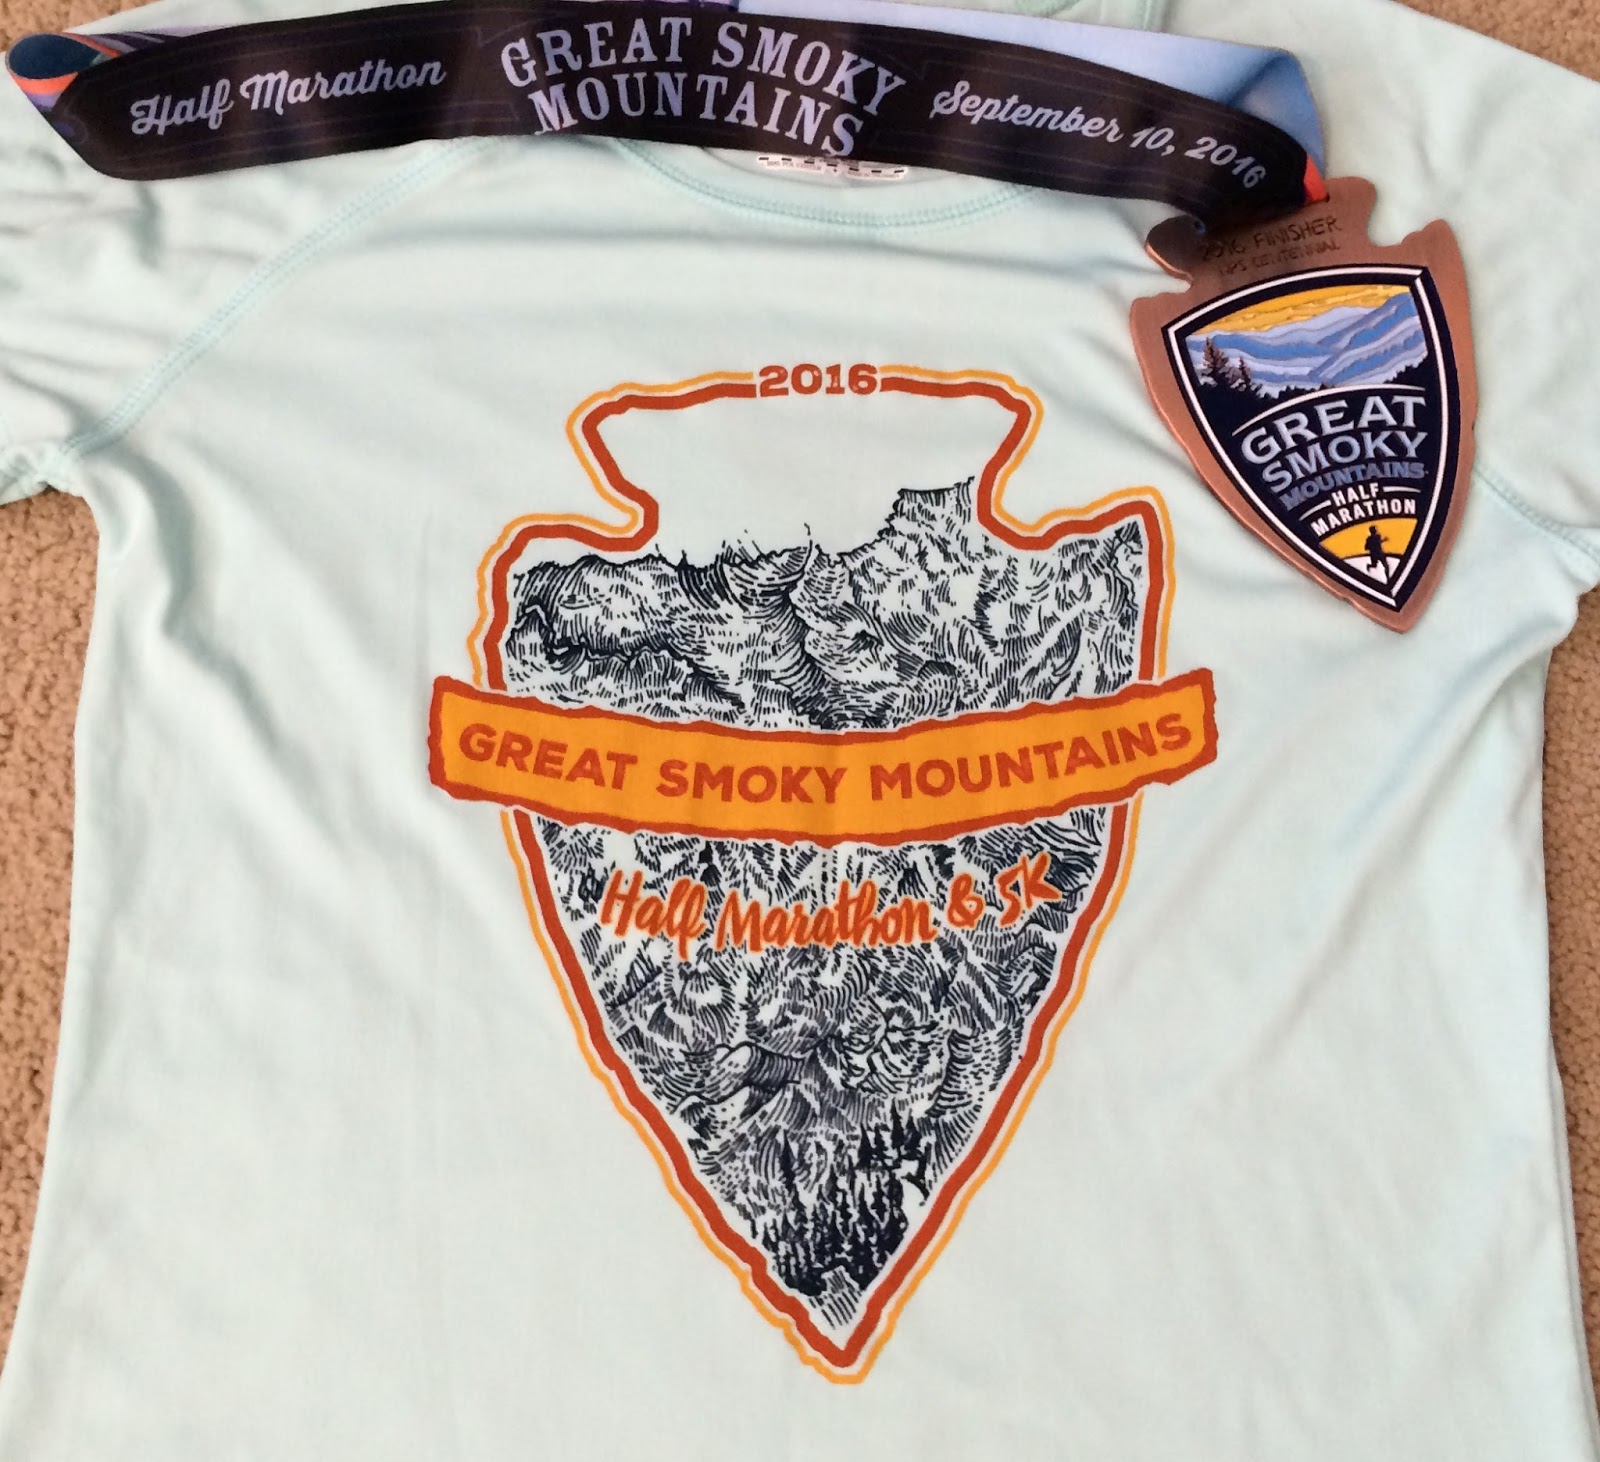 50 states, races, and t-shirts